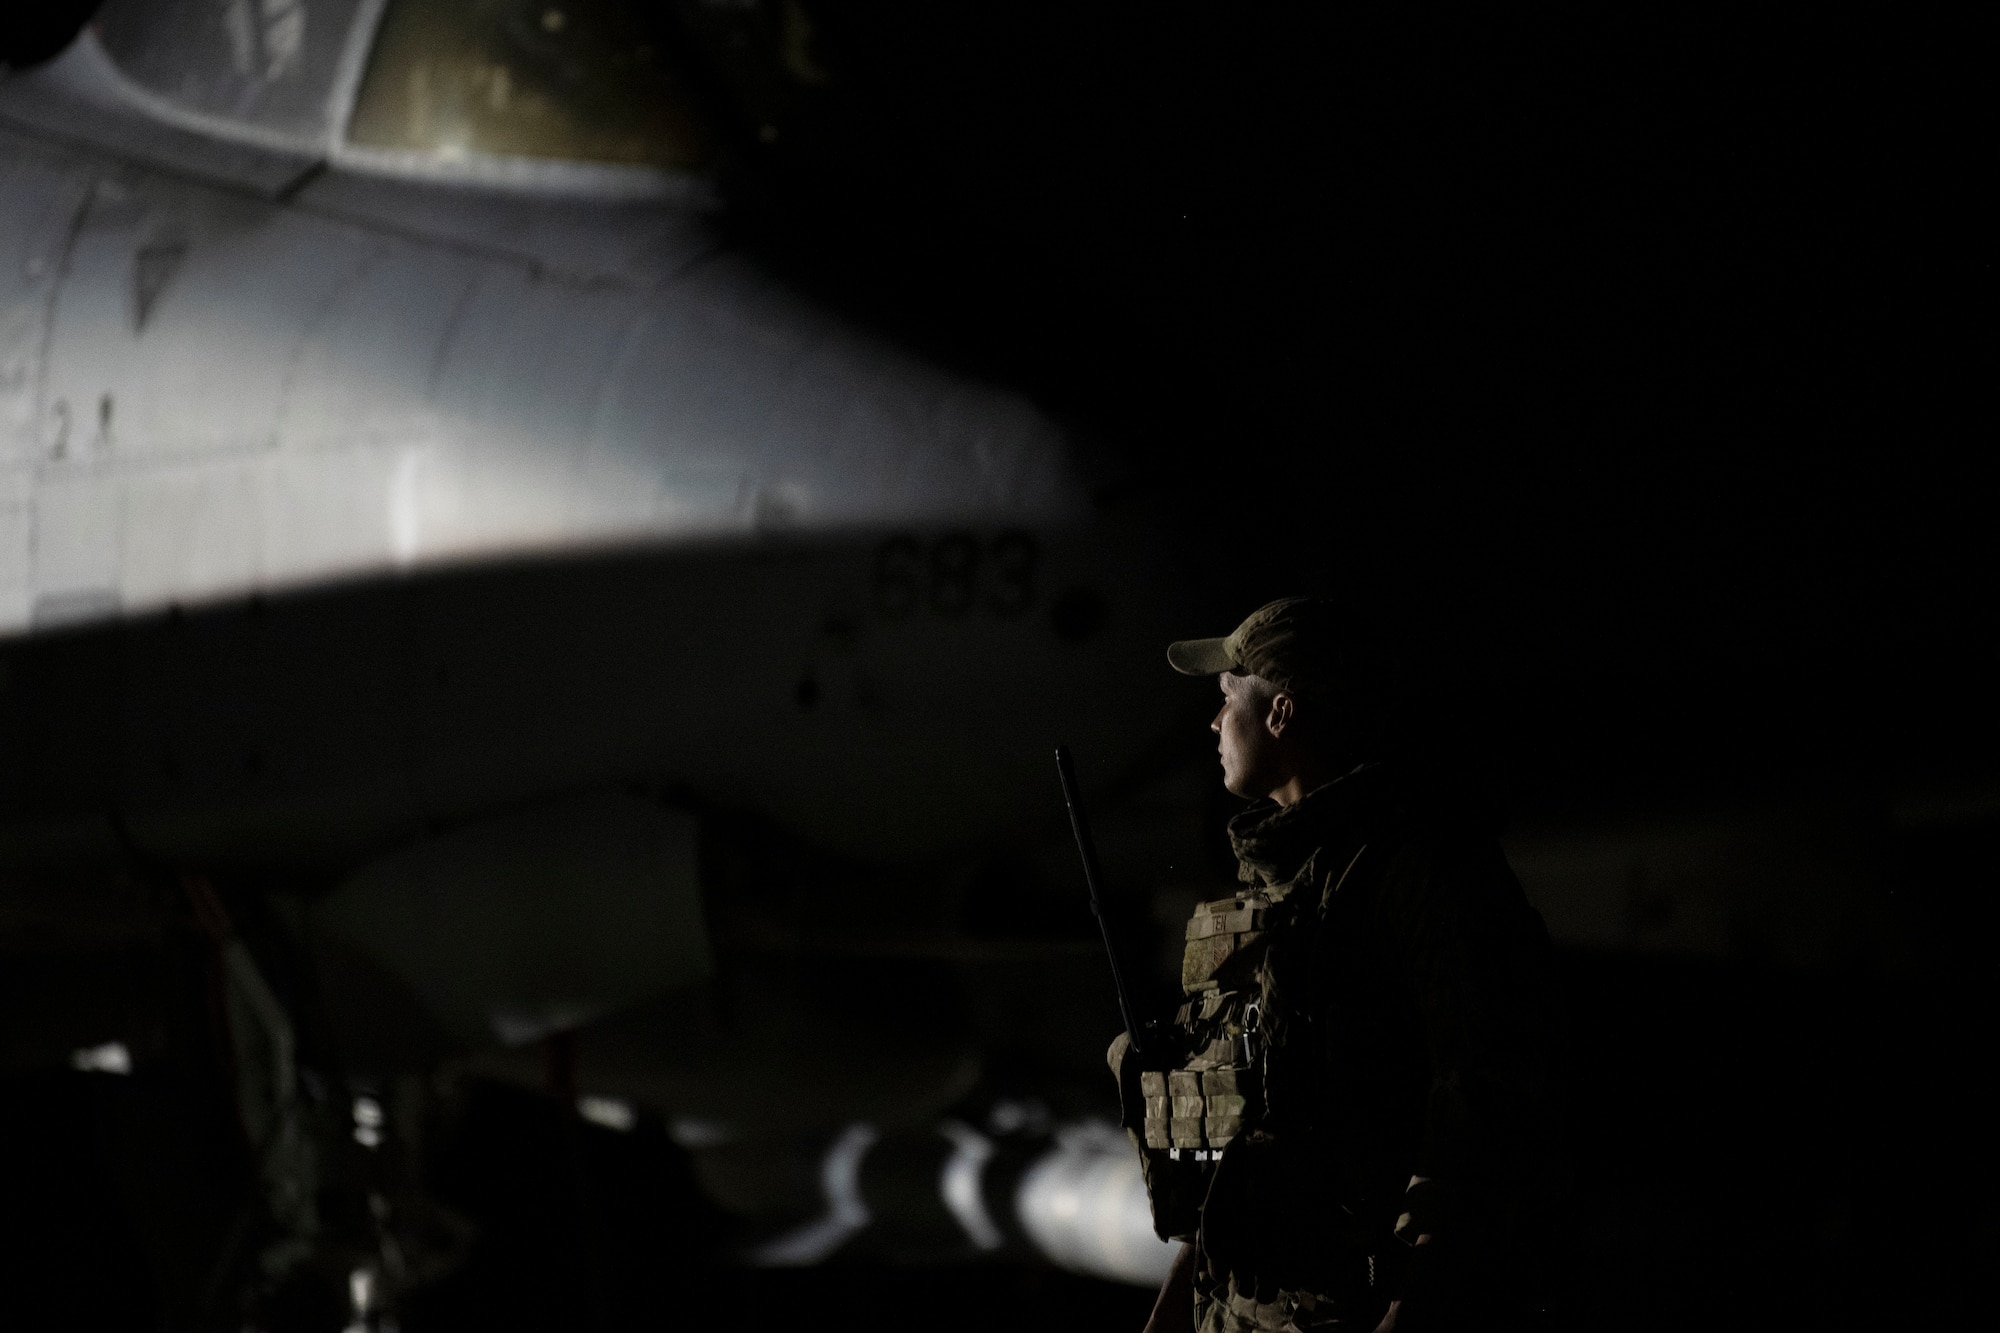 U.S. Air Force Staff Sgt. Radames Ten, a security forces journeyman with the 156th Security Operations Squadron, Puerto Rico Air National Guard, provides security for an A-10 Thunderbolt II aircraft during the Agile Rage exercise, Avon Park, Florida, Feb. 27, 2024. Agile Rage 2024 is a National Guard Bureau (NGB)/A3 led military exercise, hosted at the Air Dominance Center, taking place from February 26 to March 8, 2024 that involves the collaborative efforts of various Air National Guard Wings conducting joint counter-land and combat search and rescue (CSAR) operations in a simulated medium to high threat environment. (U.S. Air National Guard photo by Master Sgt. Rafael D. Rosa)